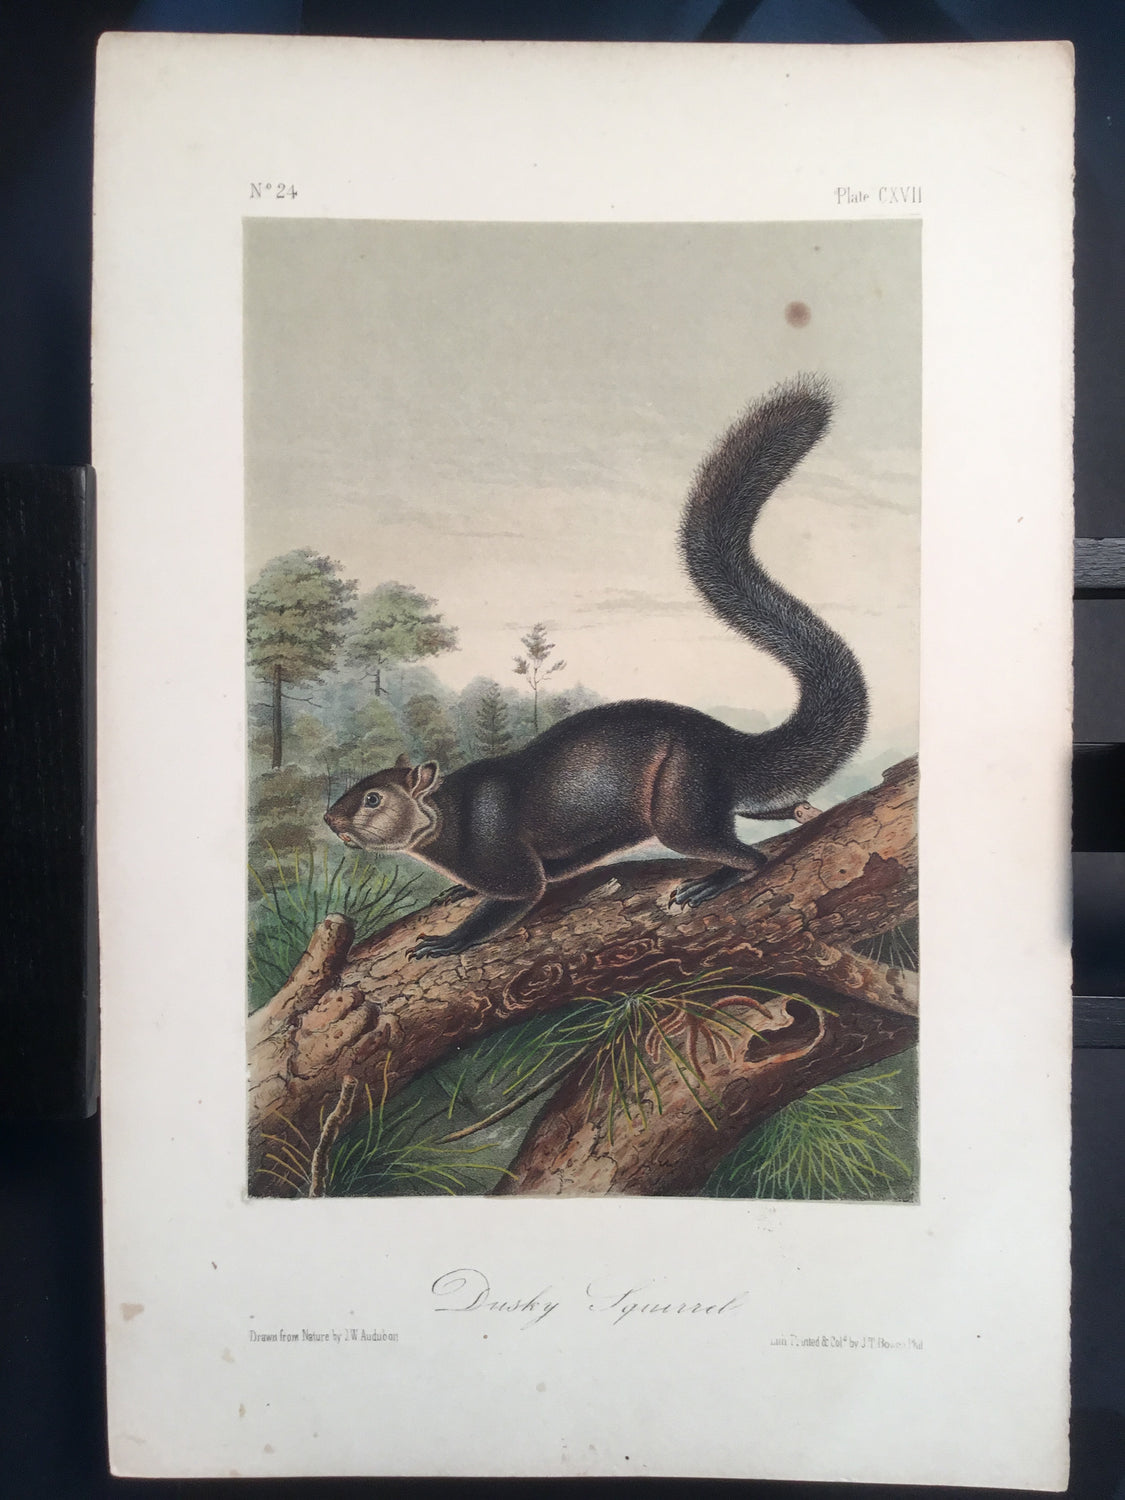 Lord-Hopkins Collection - Dusky Squirrel